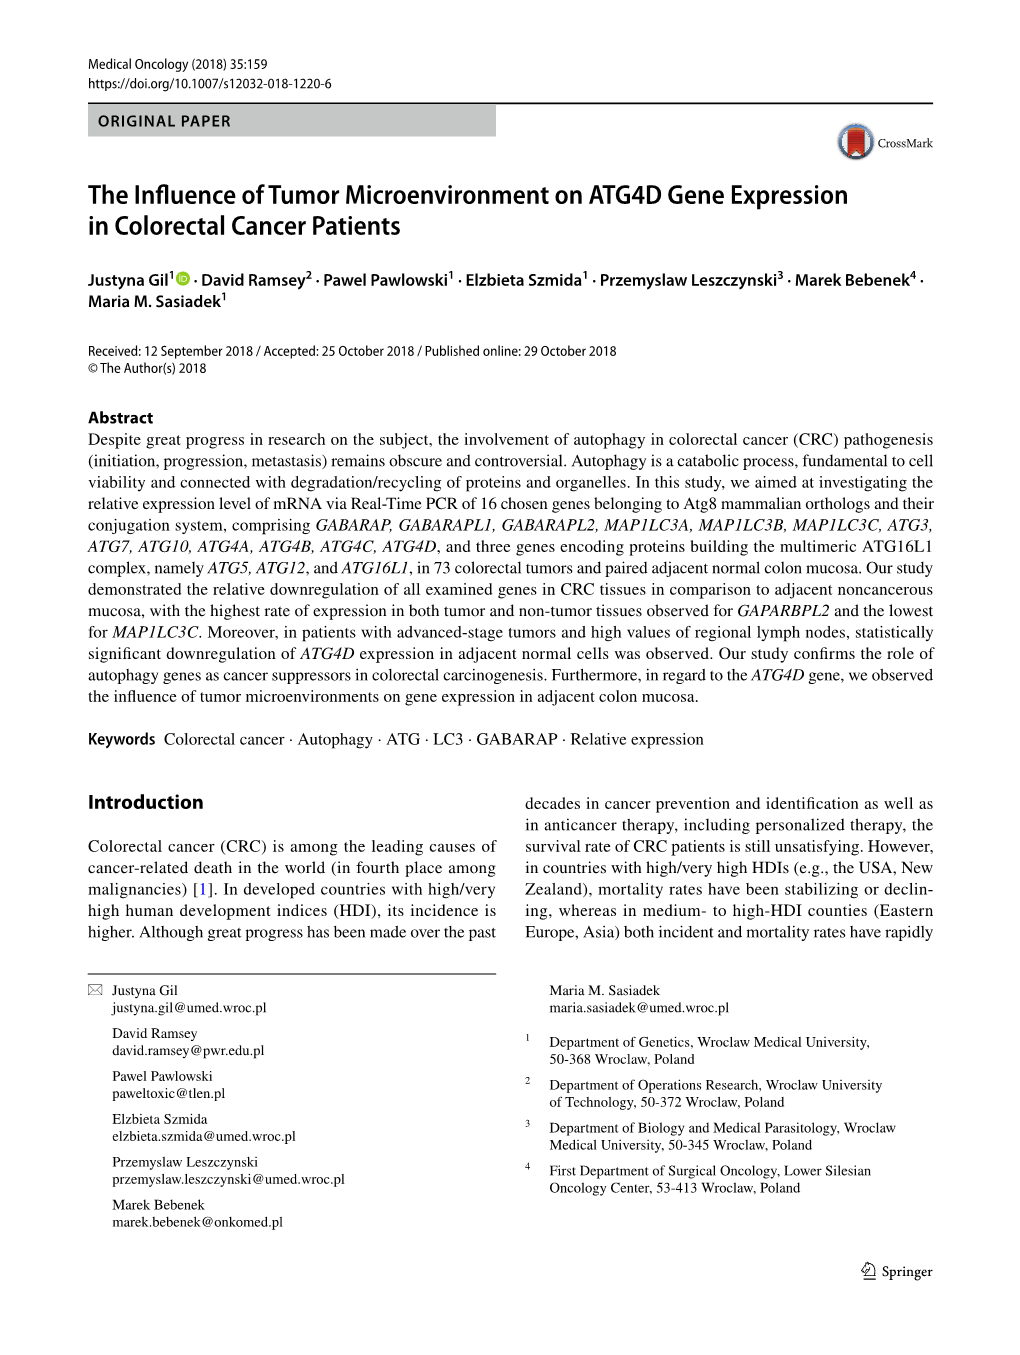 The Influence of Tumor Microenvironment on ATG4D Gene Expression in Colorectal Cancer Patients